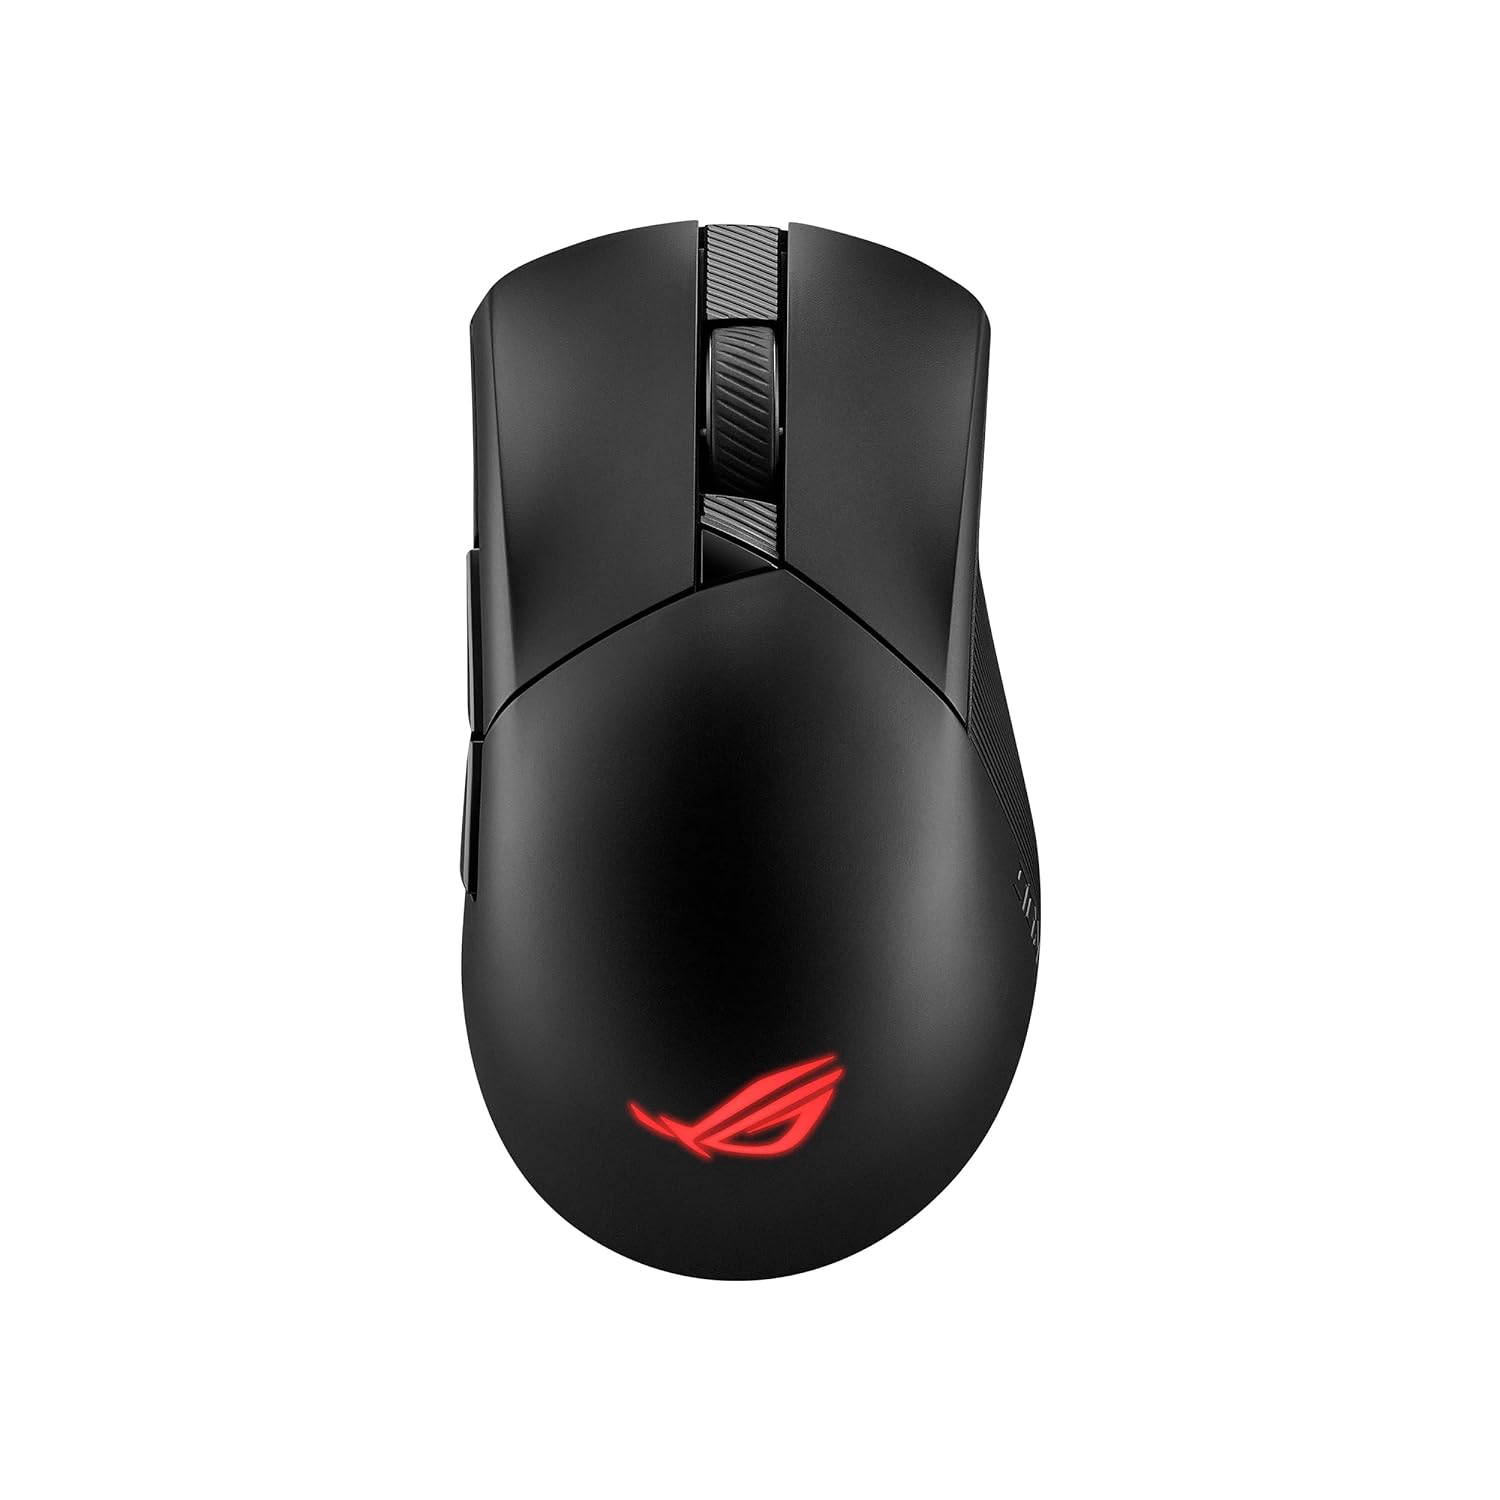 ASUS ROG Gladius III Wired Gaming Mouse | Tuned 19,000 DPI Sensor, Hot Swappable Push-Fit II, Ergo Shape